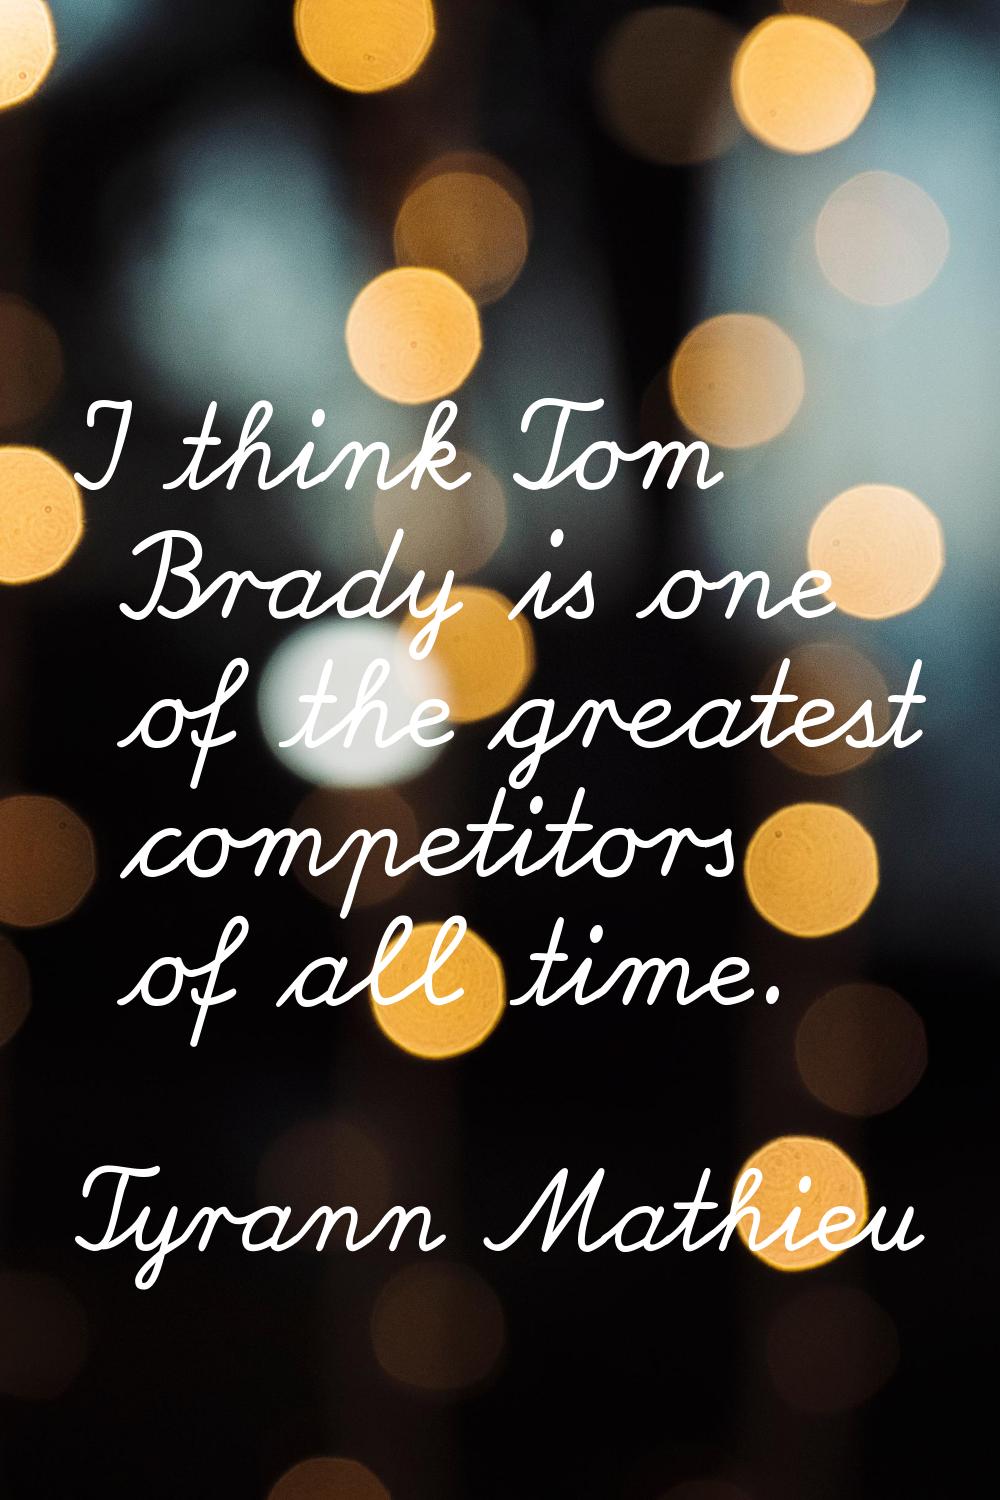 I think Tom Brady is one of the greatest competitors of all time.